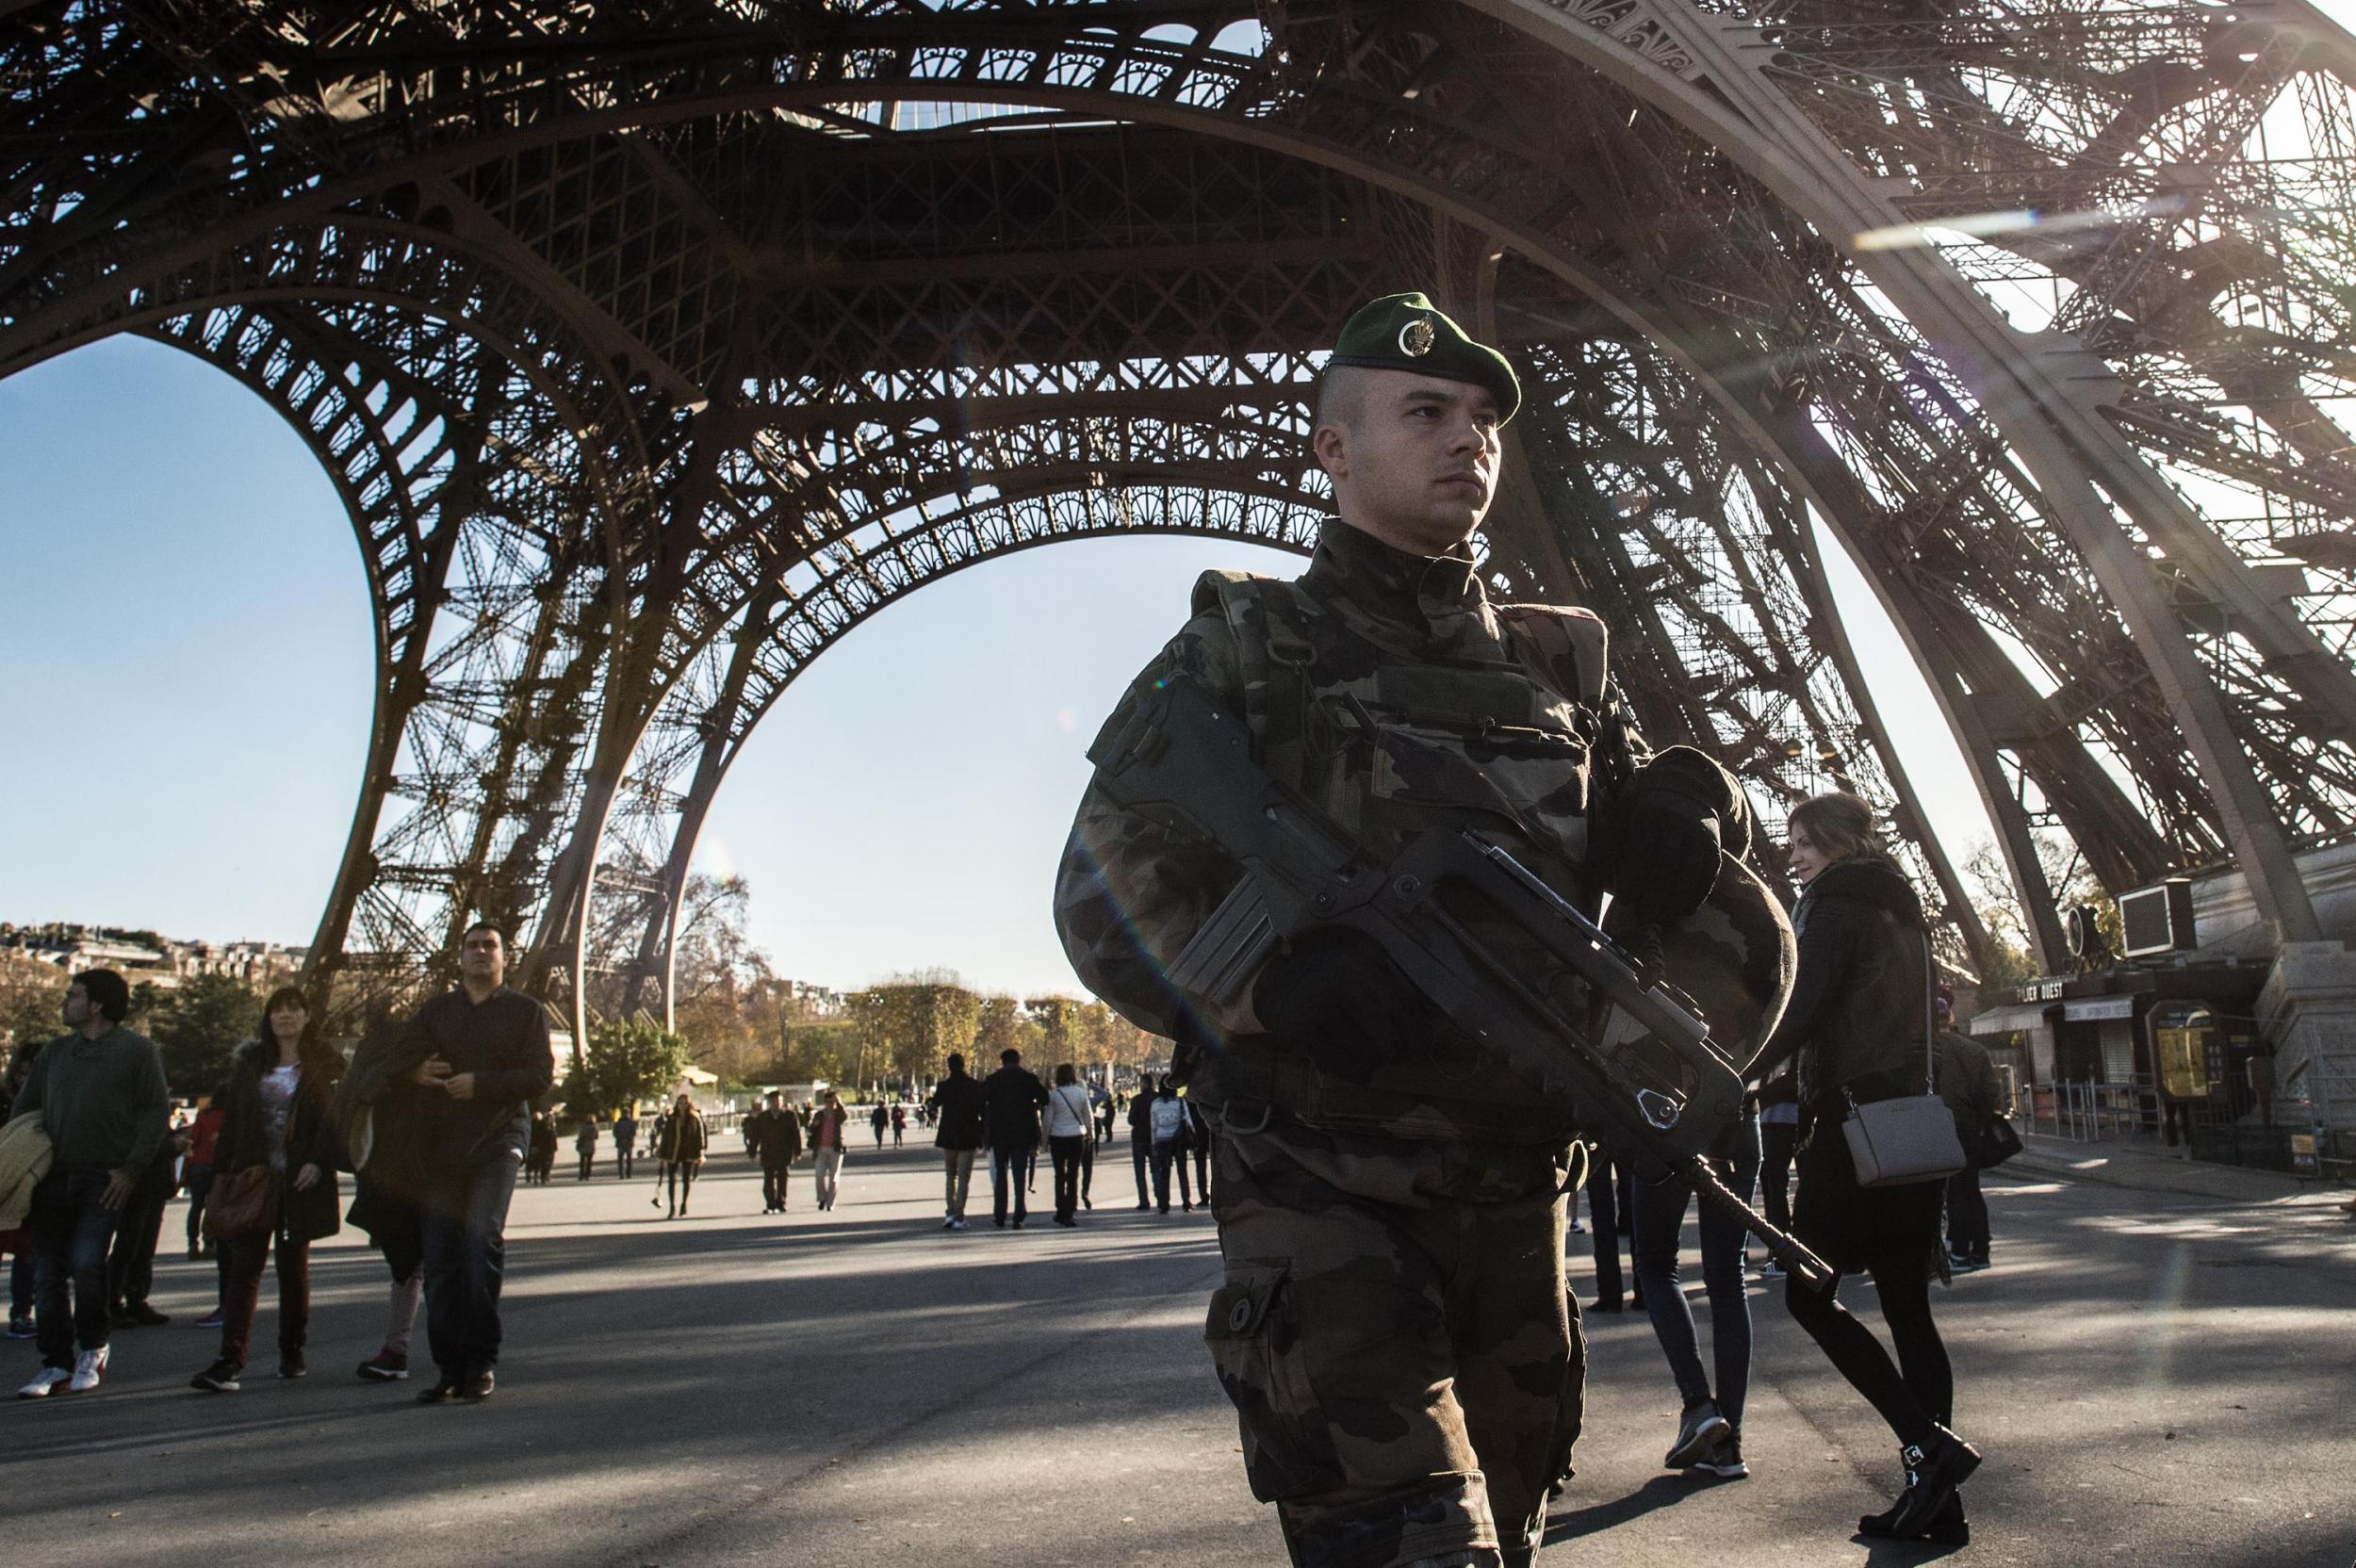 Security forces' powers have been repeatedly expanded in France